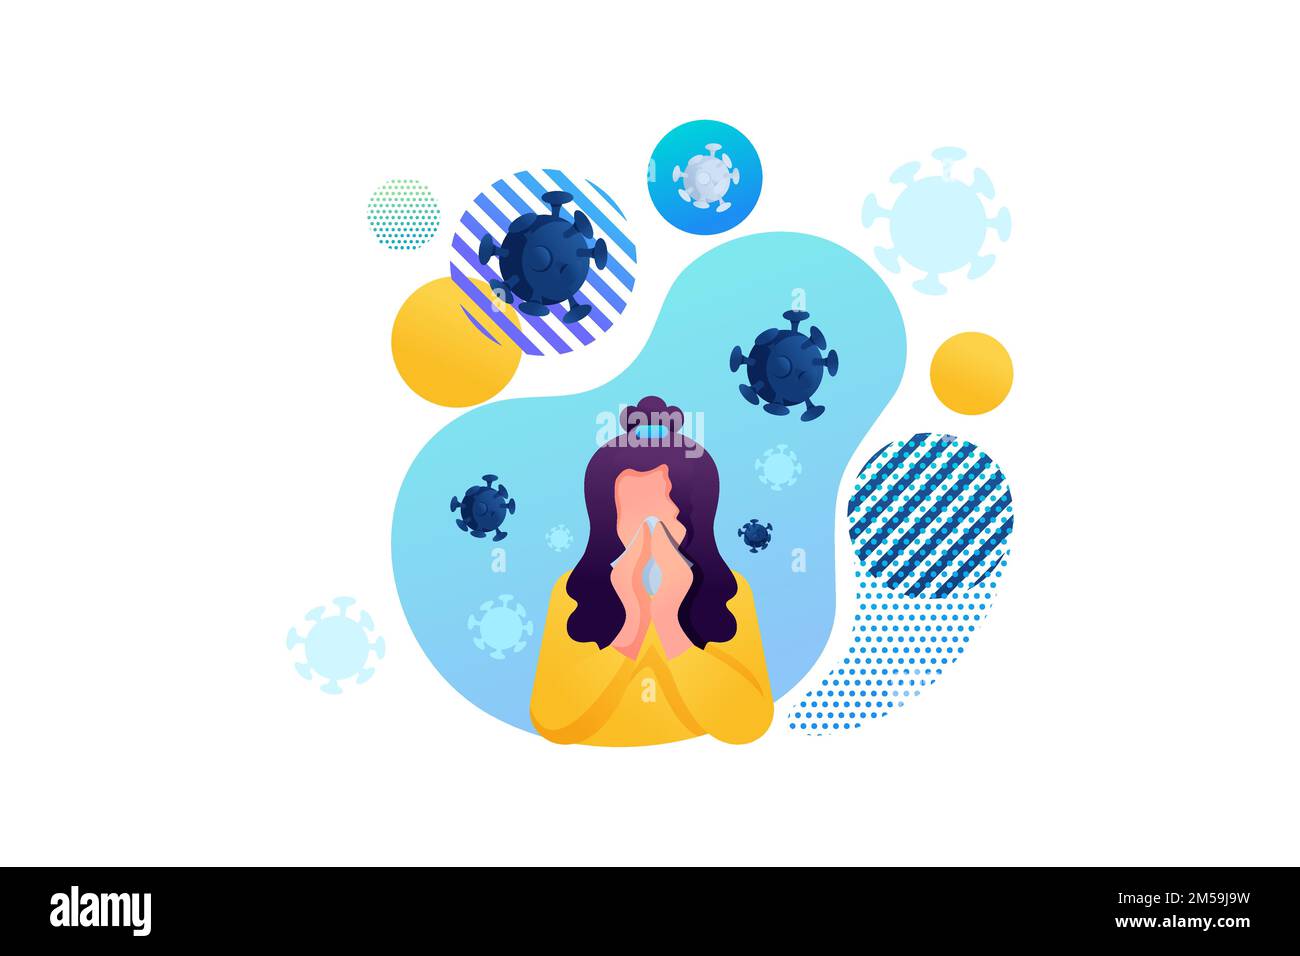 Stop the virus. The girl suffers from a runny nose, cold, flu. Bacteria are flying around. Flat 2D character. Concept for web design. Stock Vector